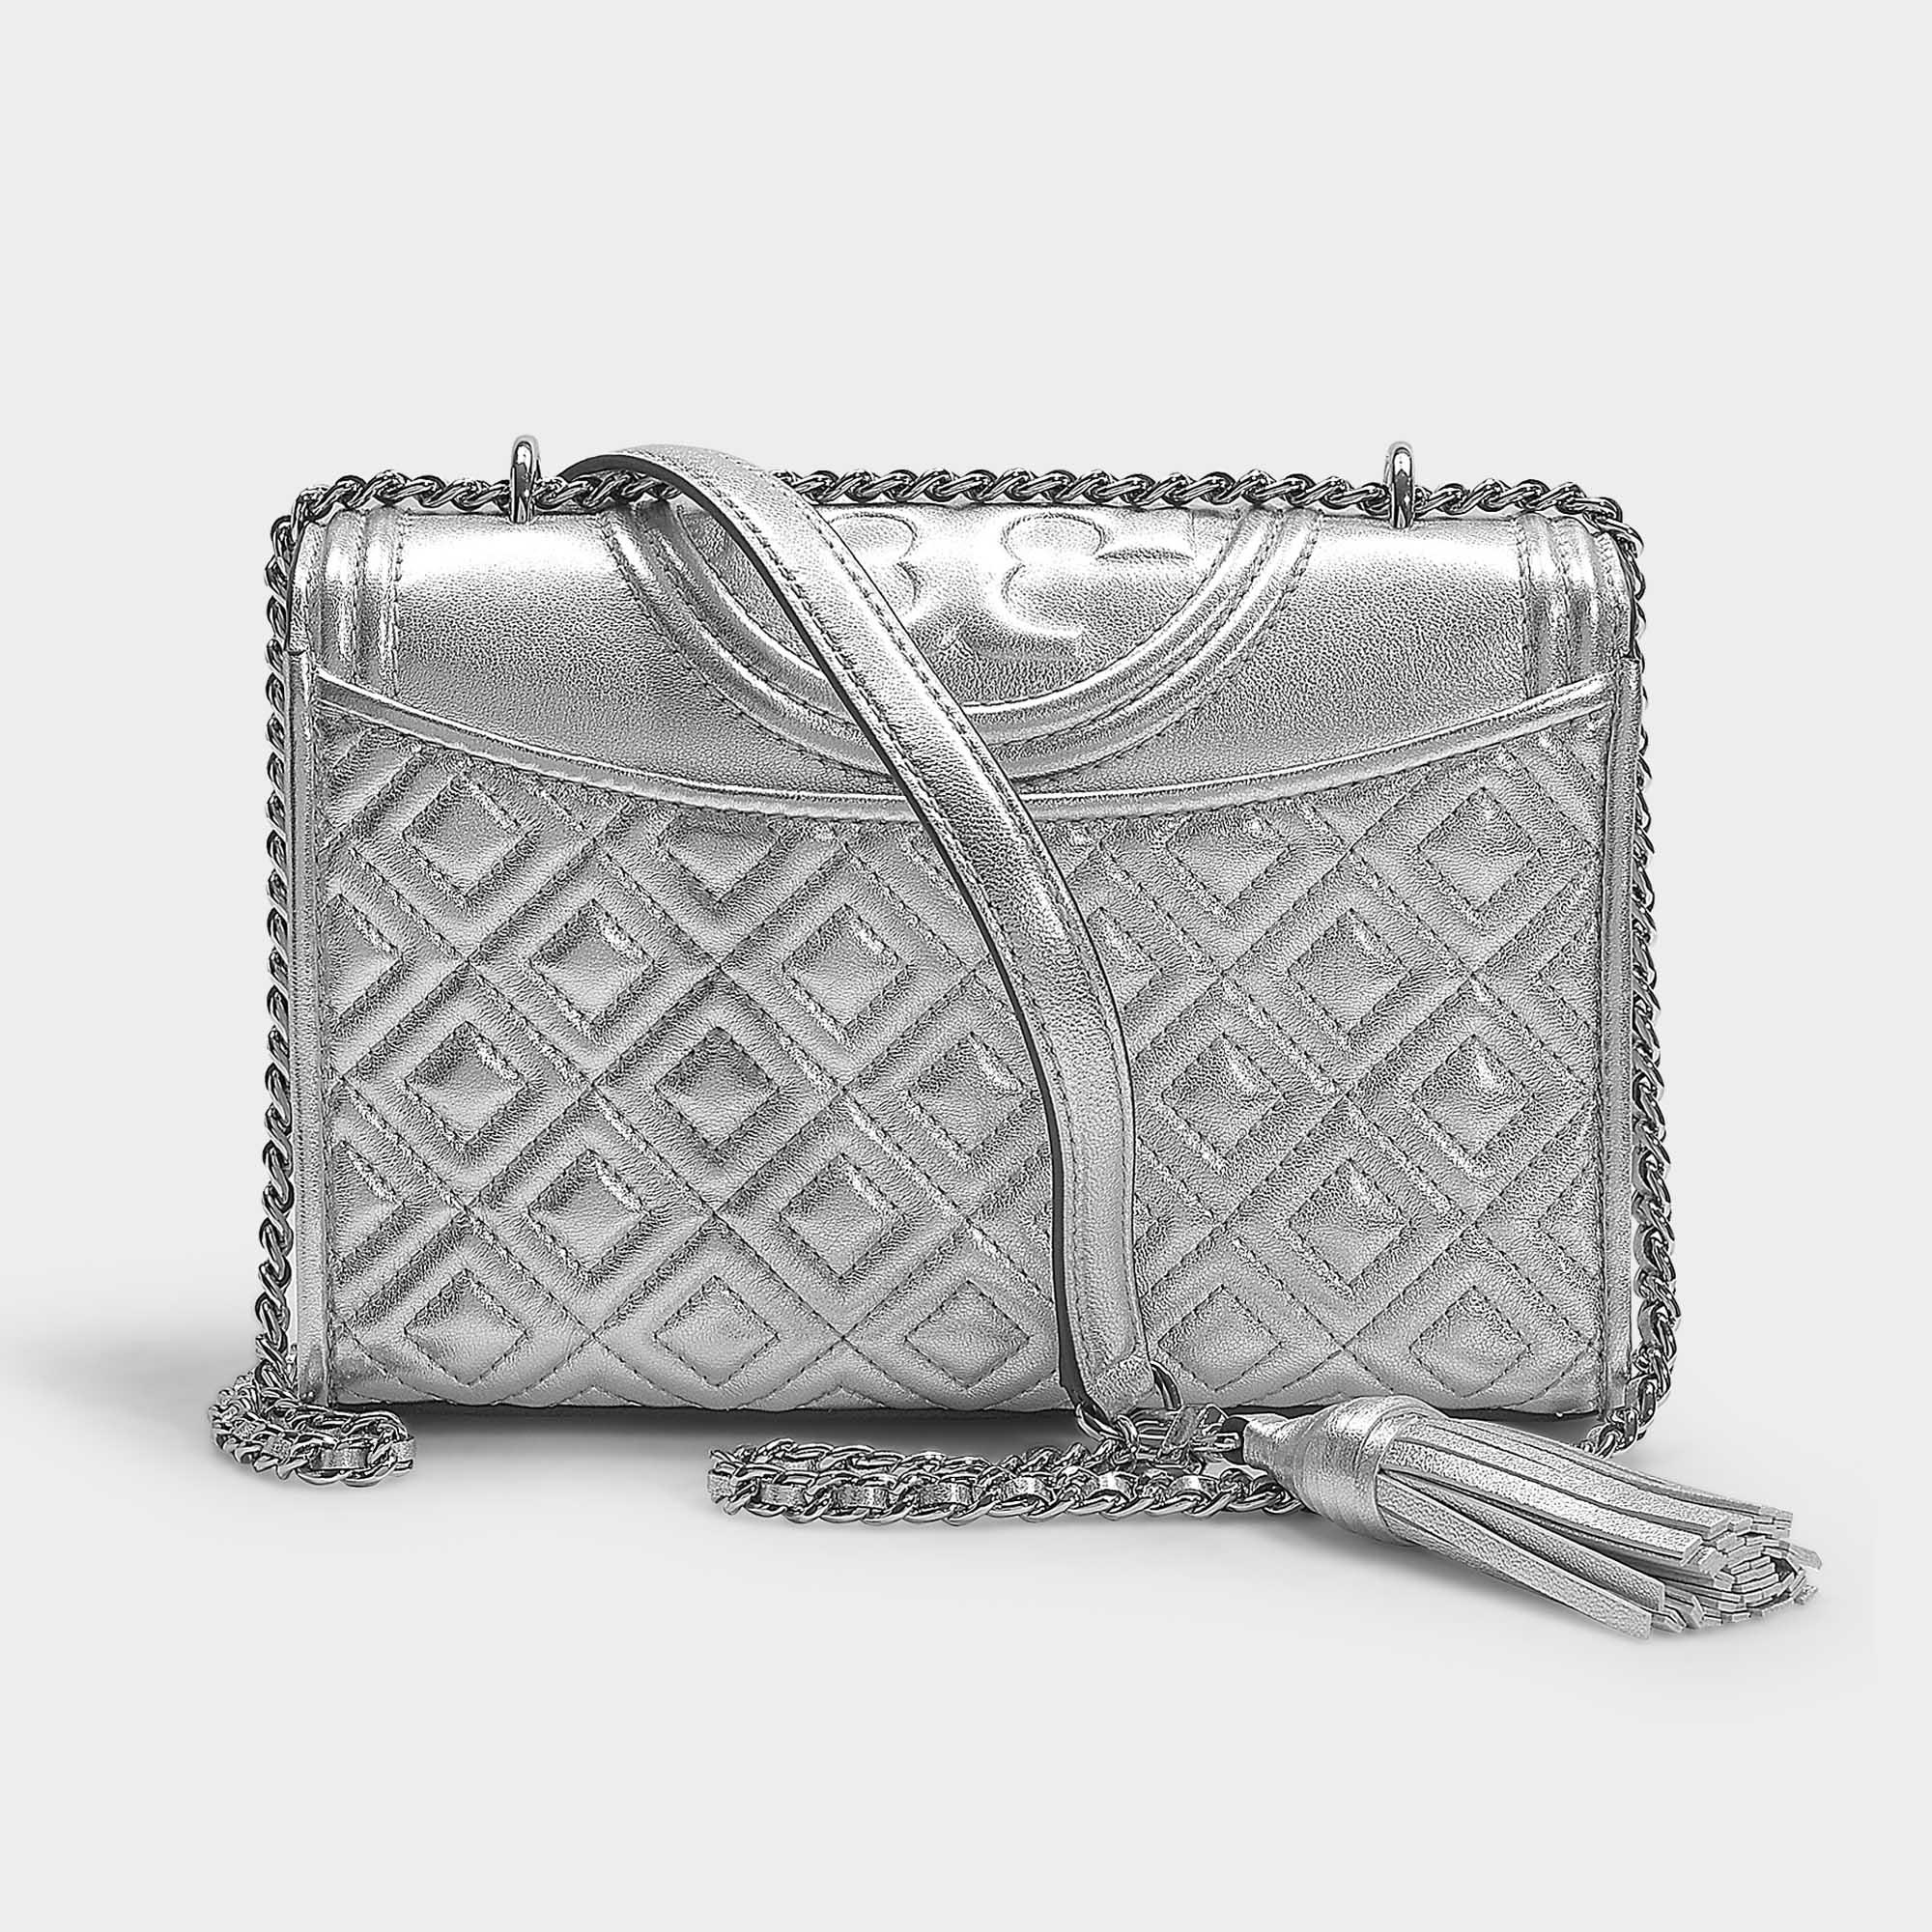 Tory Burch Leather Fleming Metallic Small Convertible Shoulder Bag ...